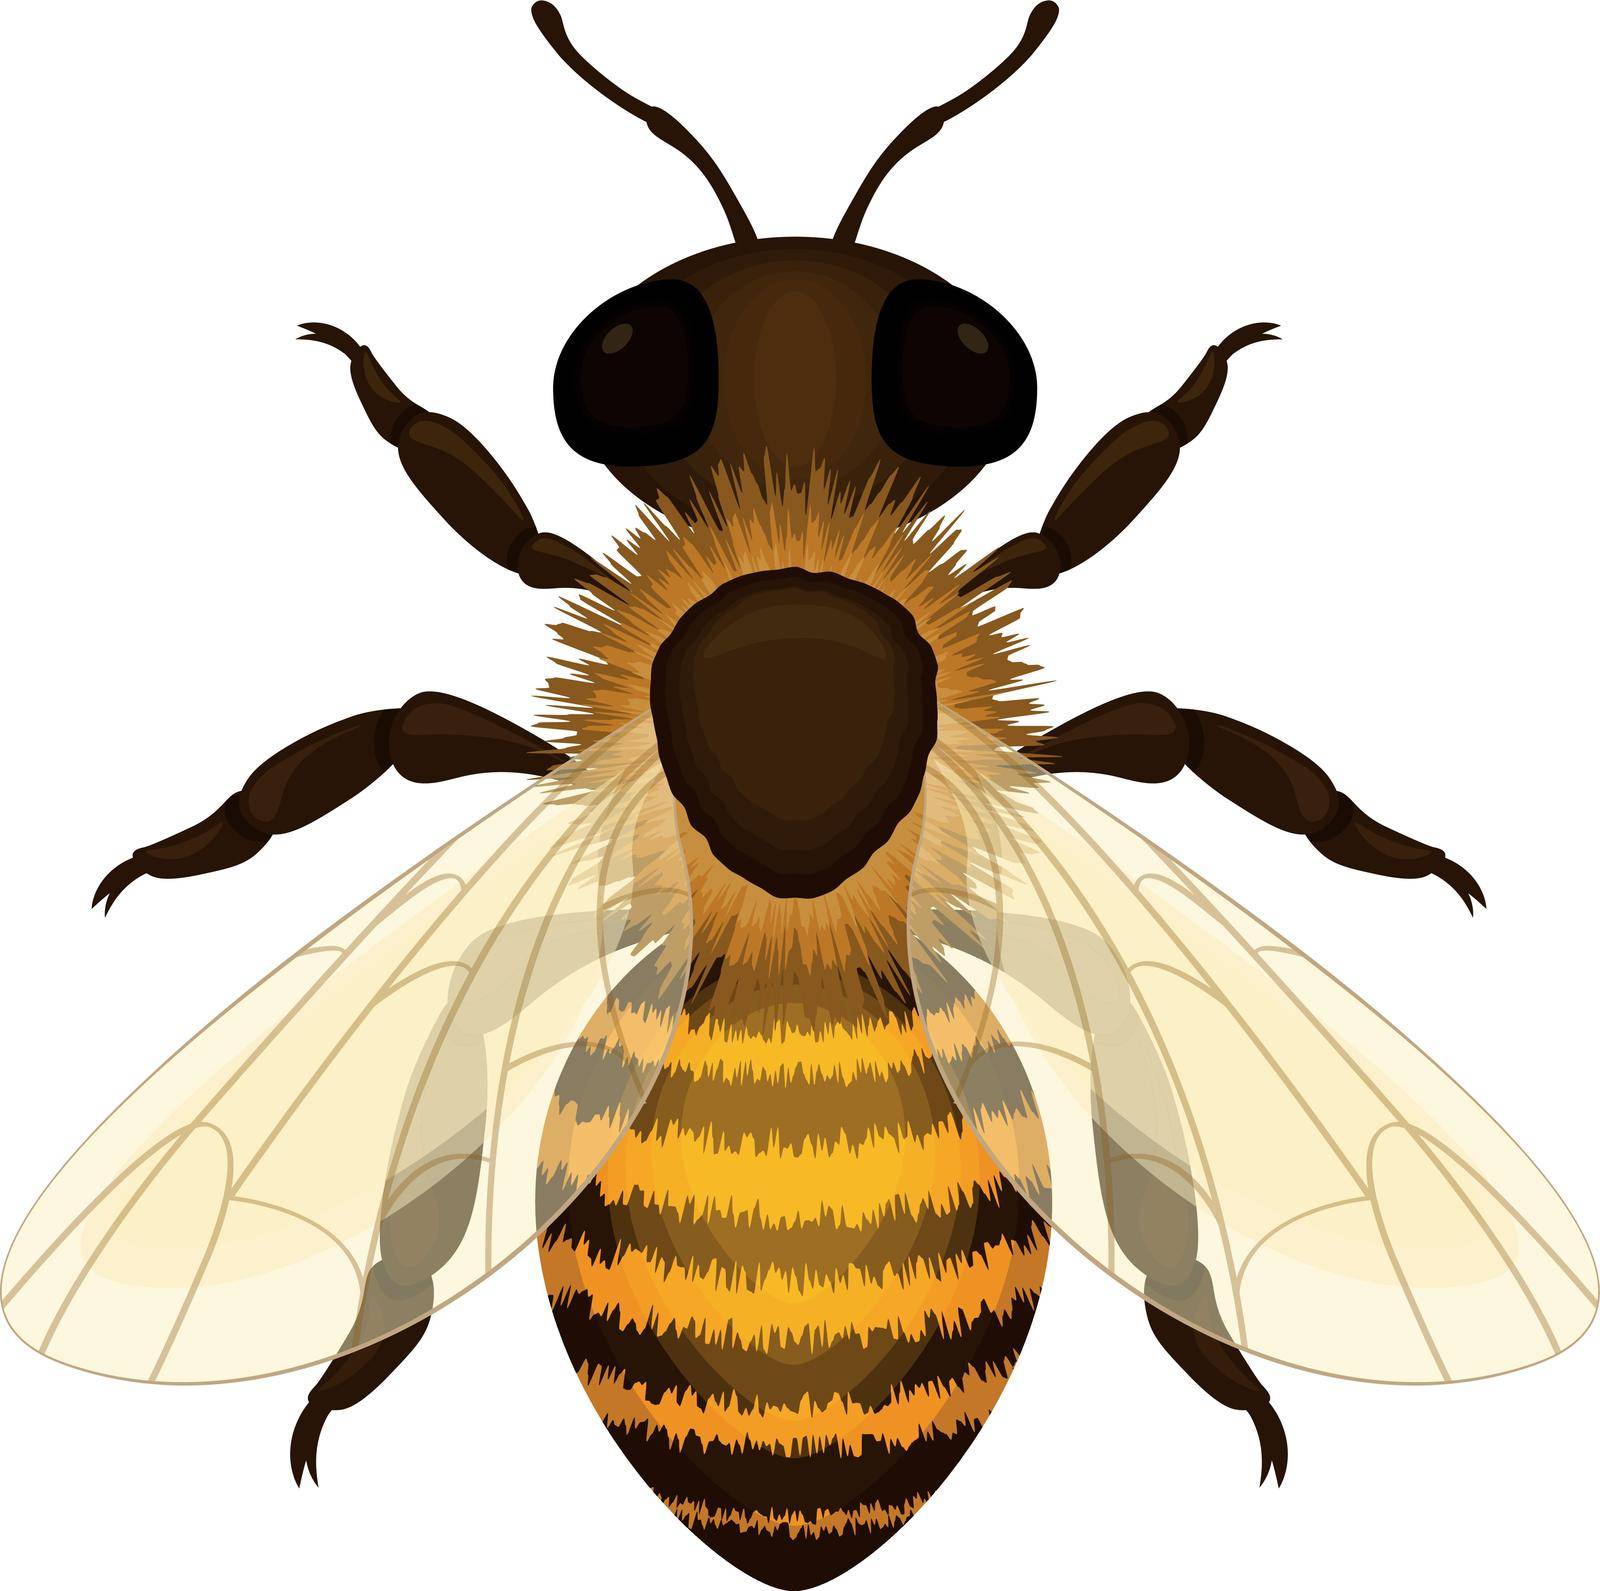 Bee. Image of a realistic working honey bee. Bee, top view. Vector illustration isolated on a white background.